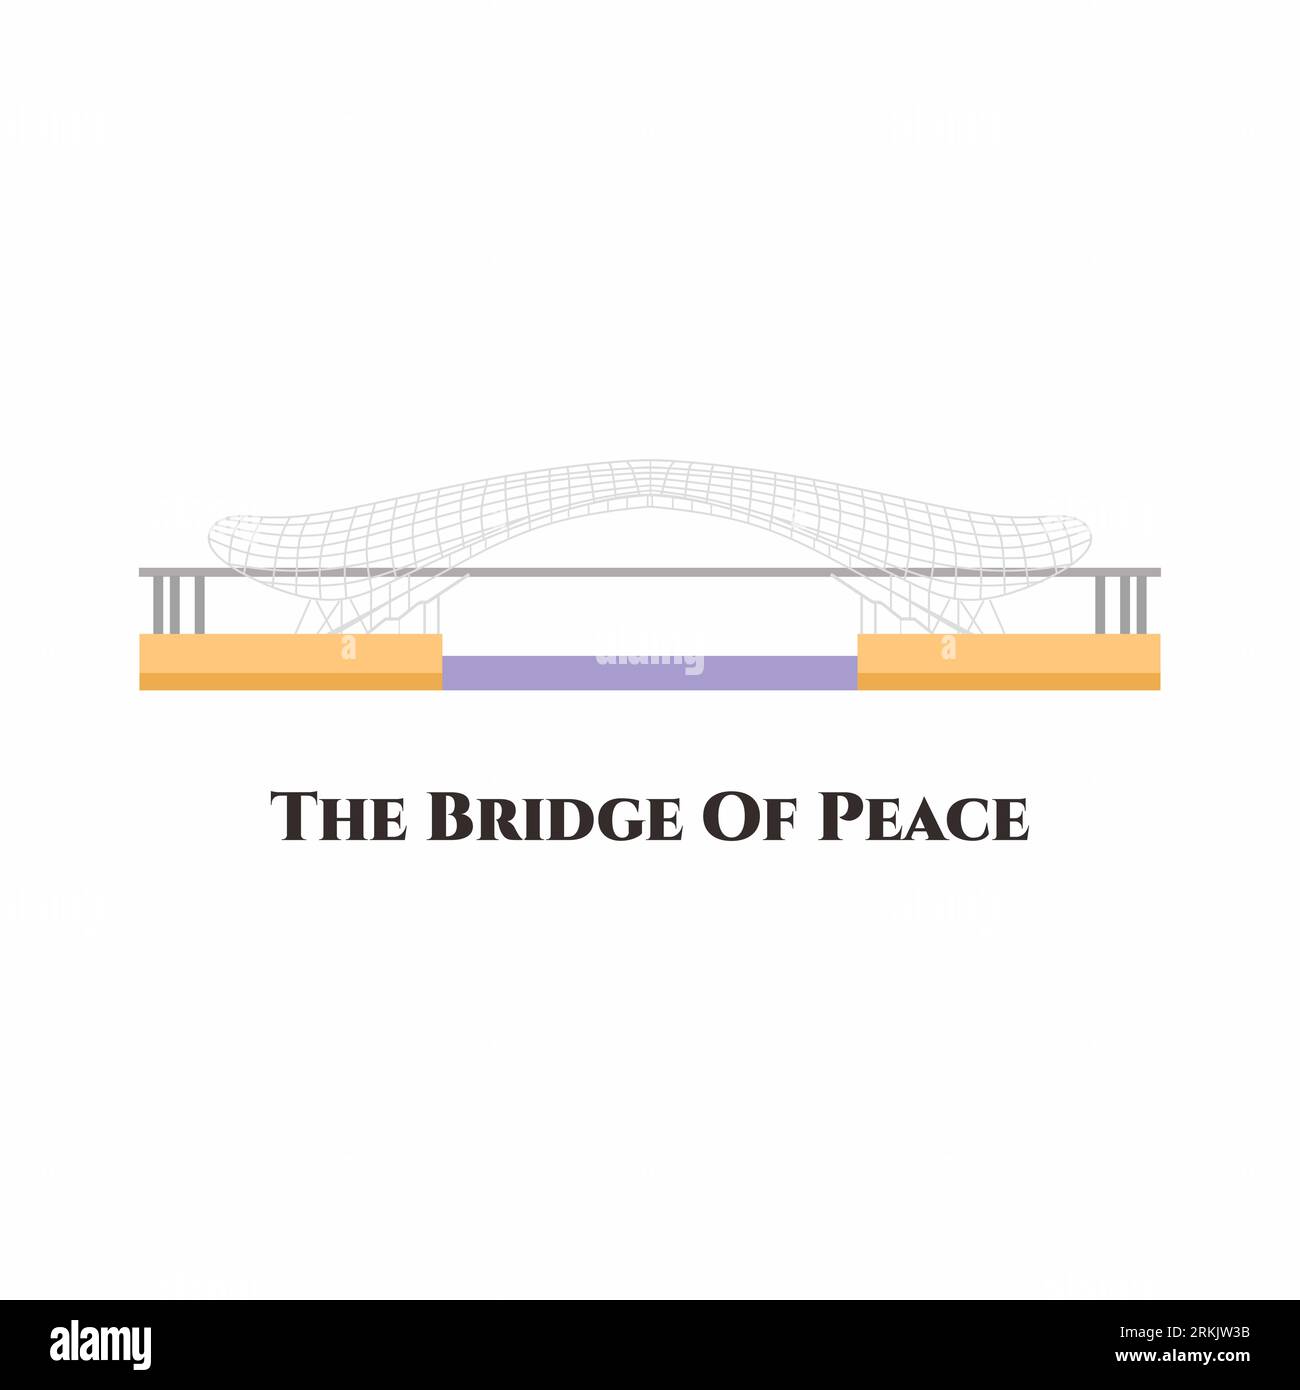 The Bridge of Peace in central Tbilisi, Georgia. The Bridge of Peace hangs delicately over the Kura River and connects the old town to the modern. Rem Stock Vector